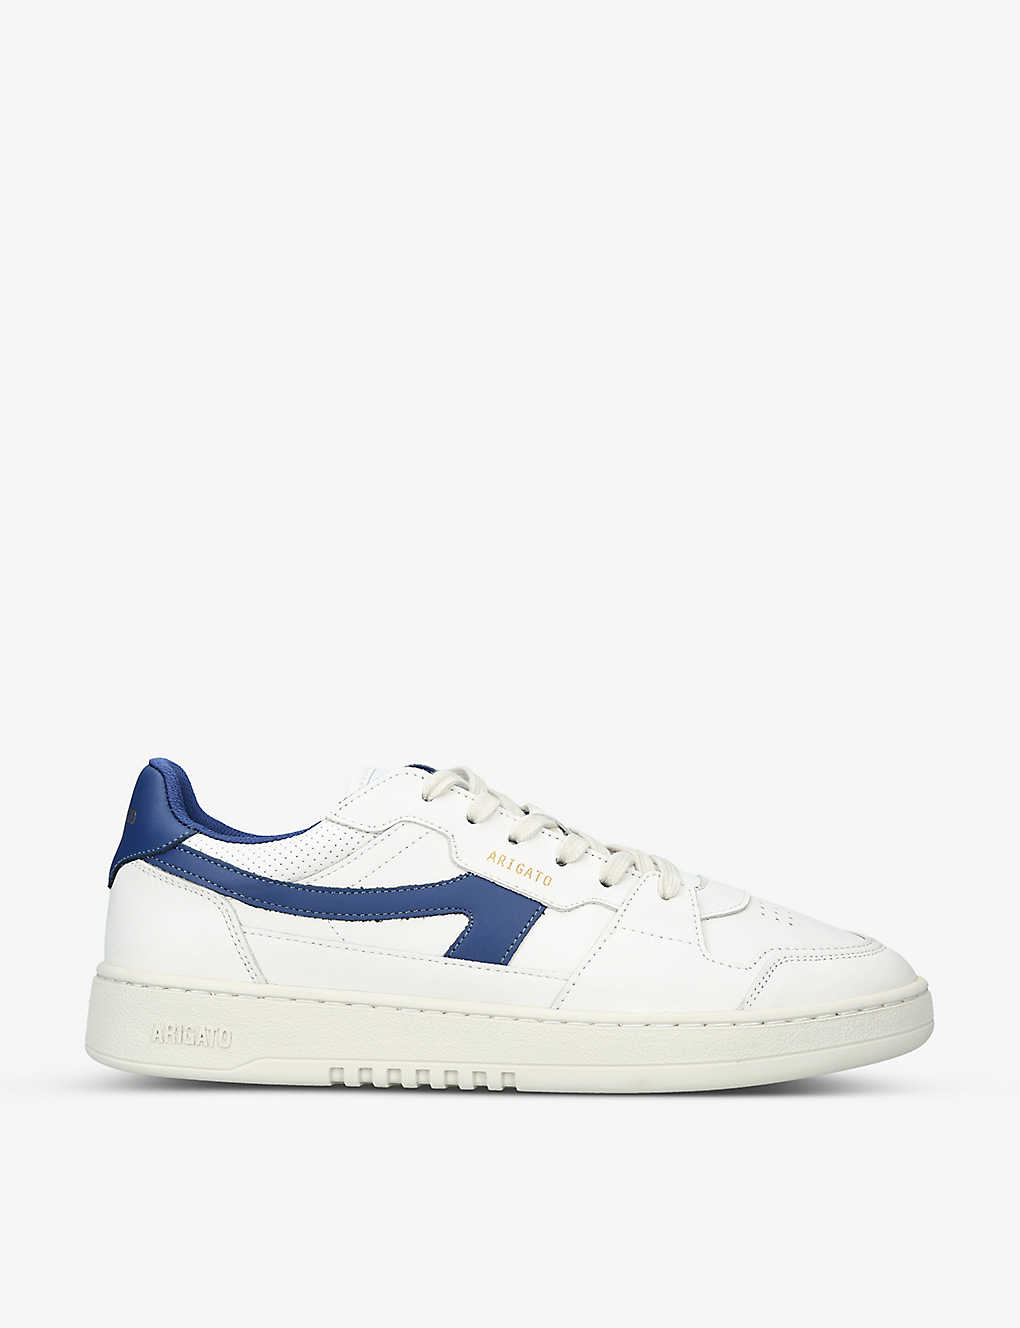 Axel Arigato Dice-a Leather And Recycled-polyester Low-top Trainers In White/navy